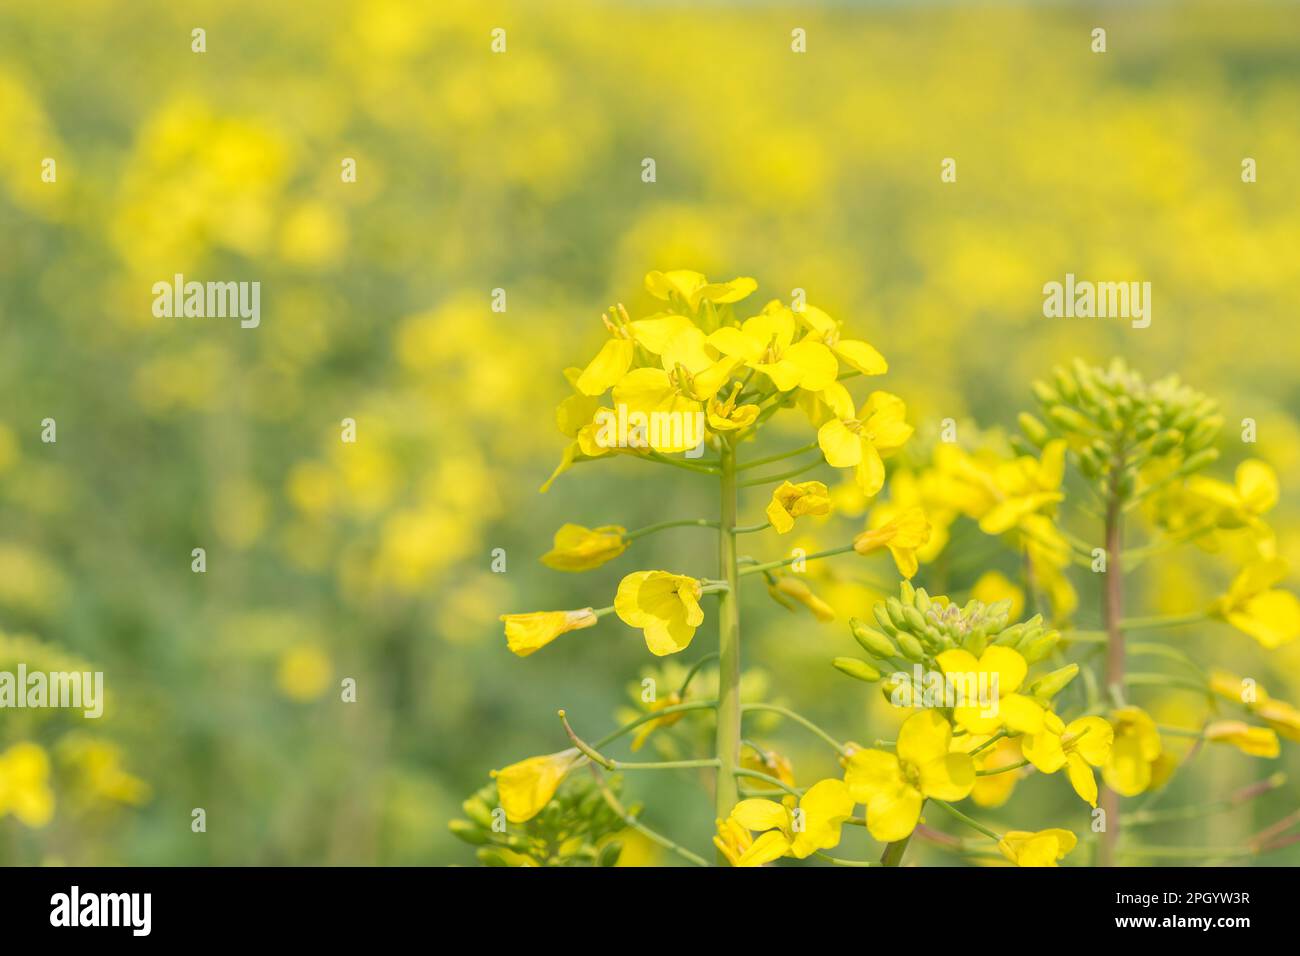 Beautiful Canola flowers with morning dew, spring background Stock Photo